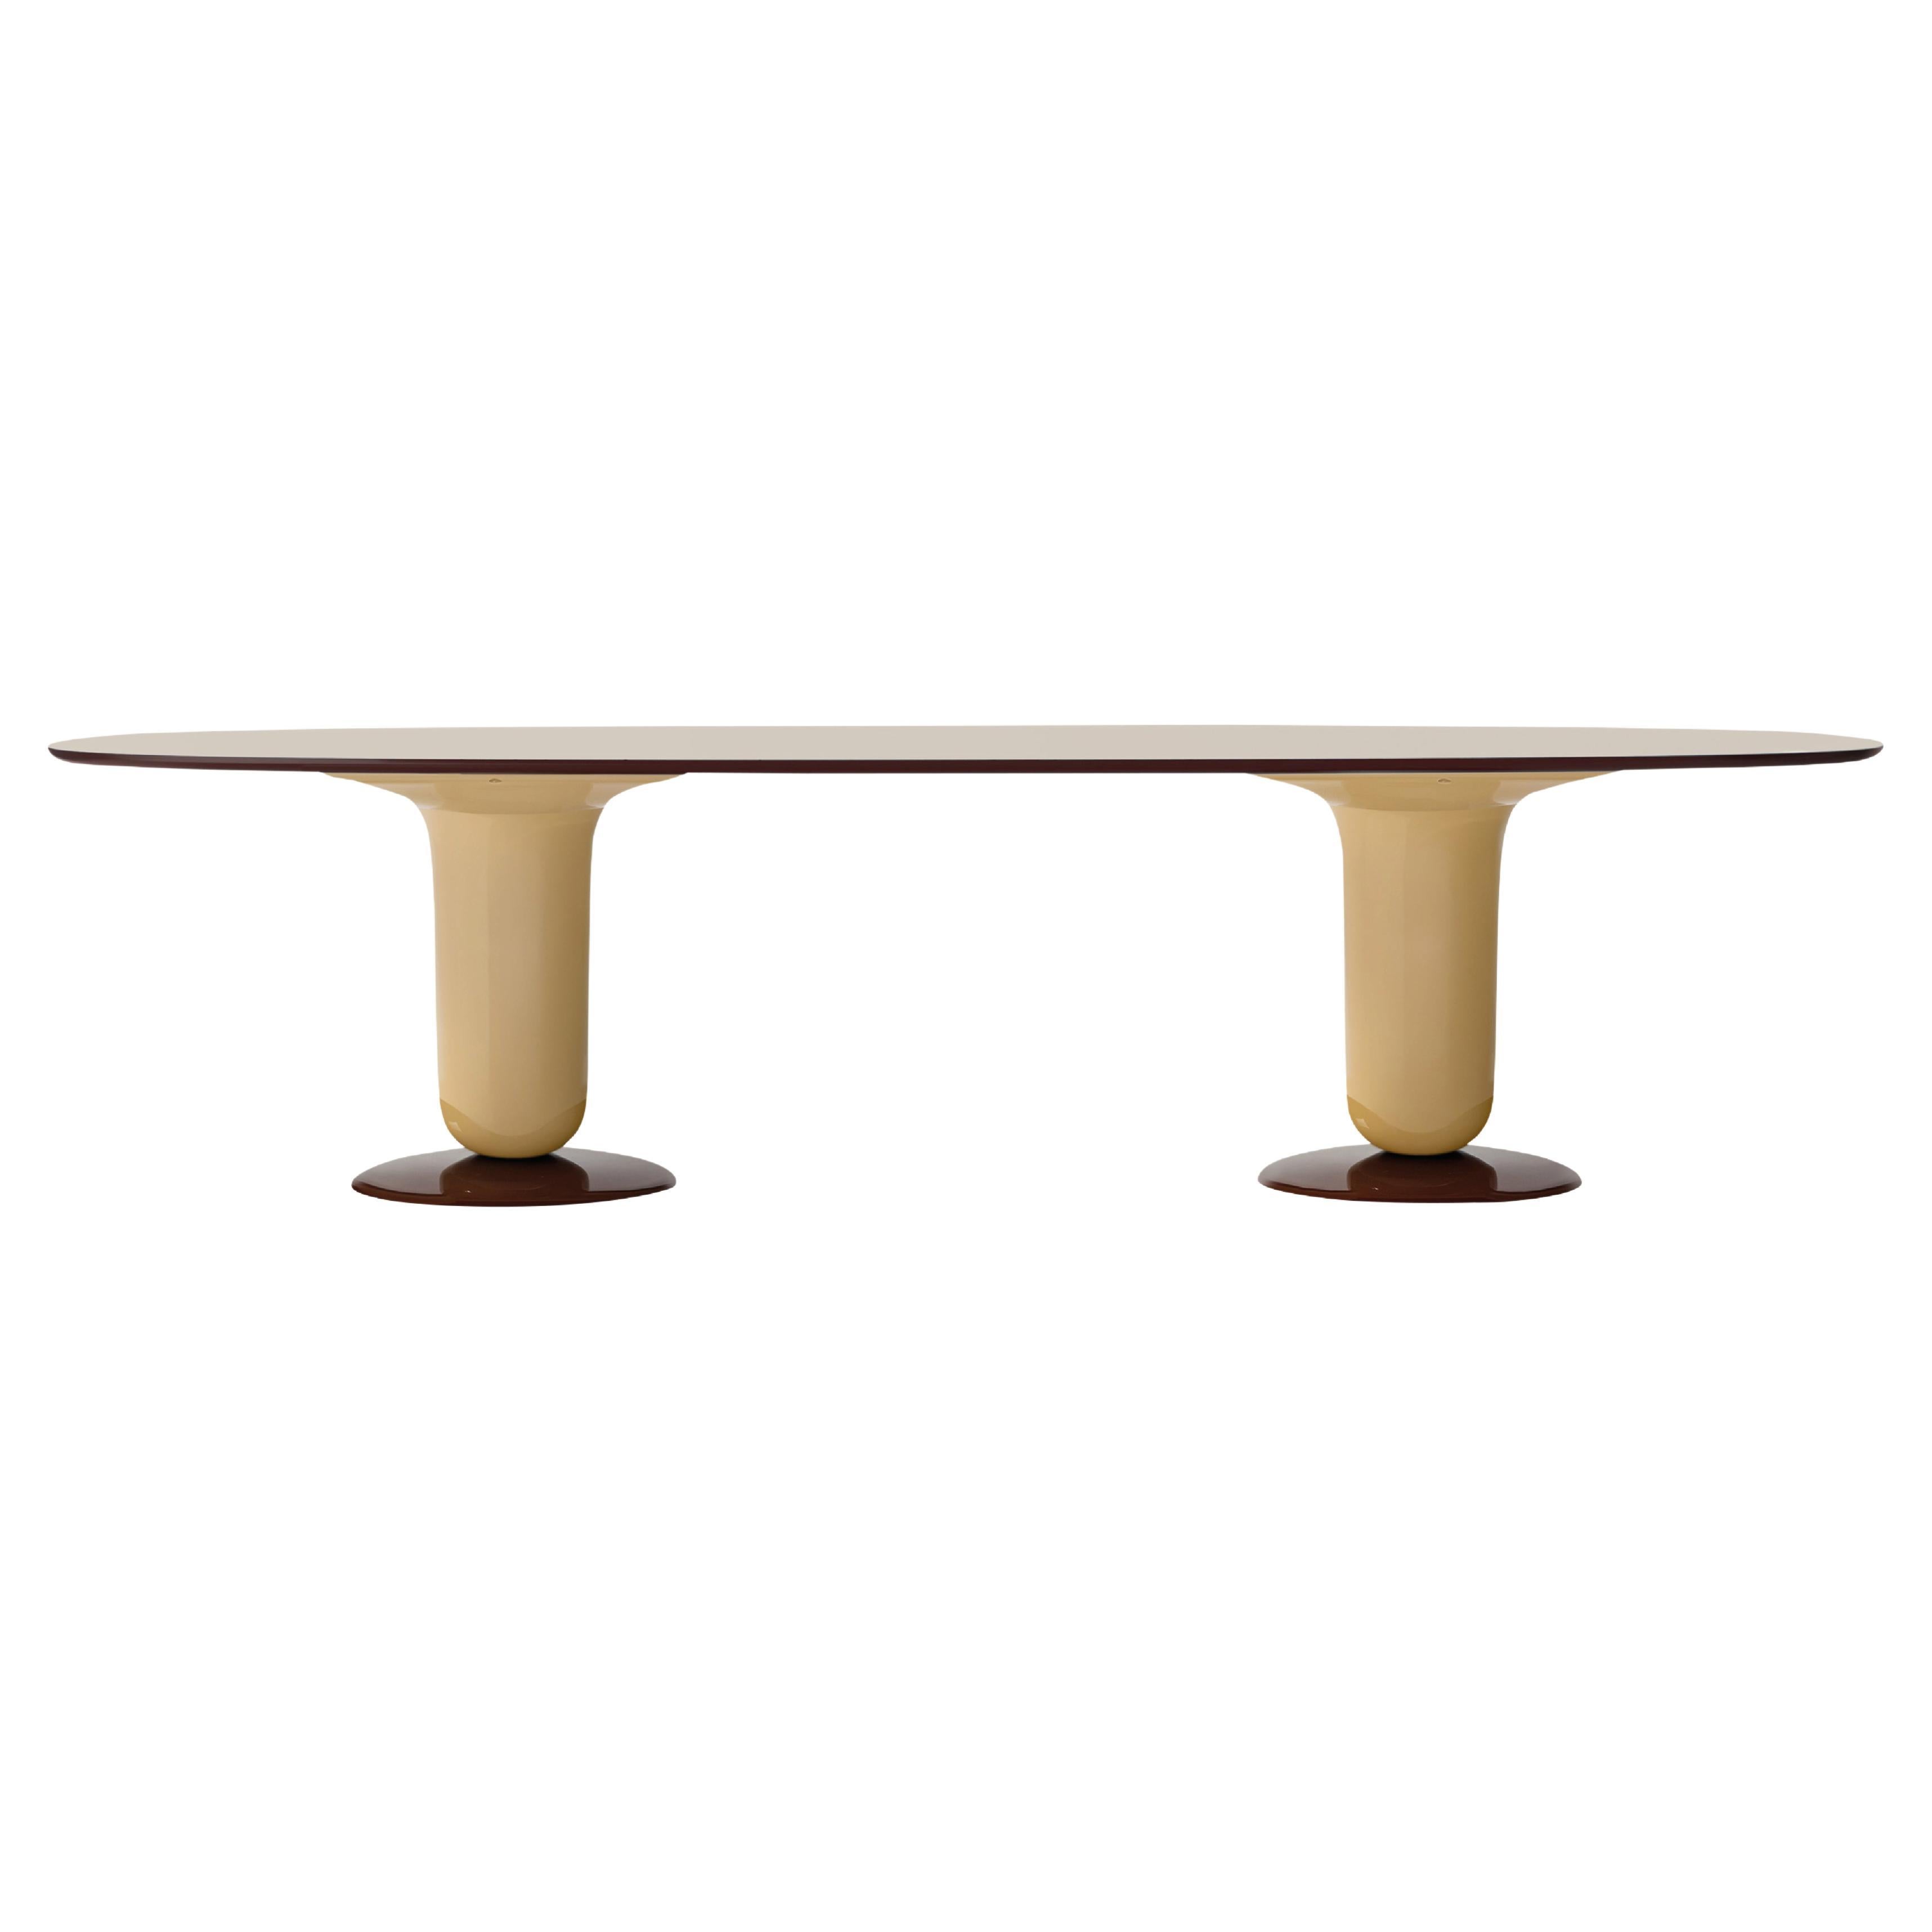 Contemporary Dining Table 'Explorer' by Jaime Hayon, 300 cm, Beige 